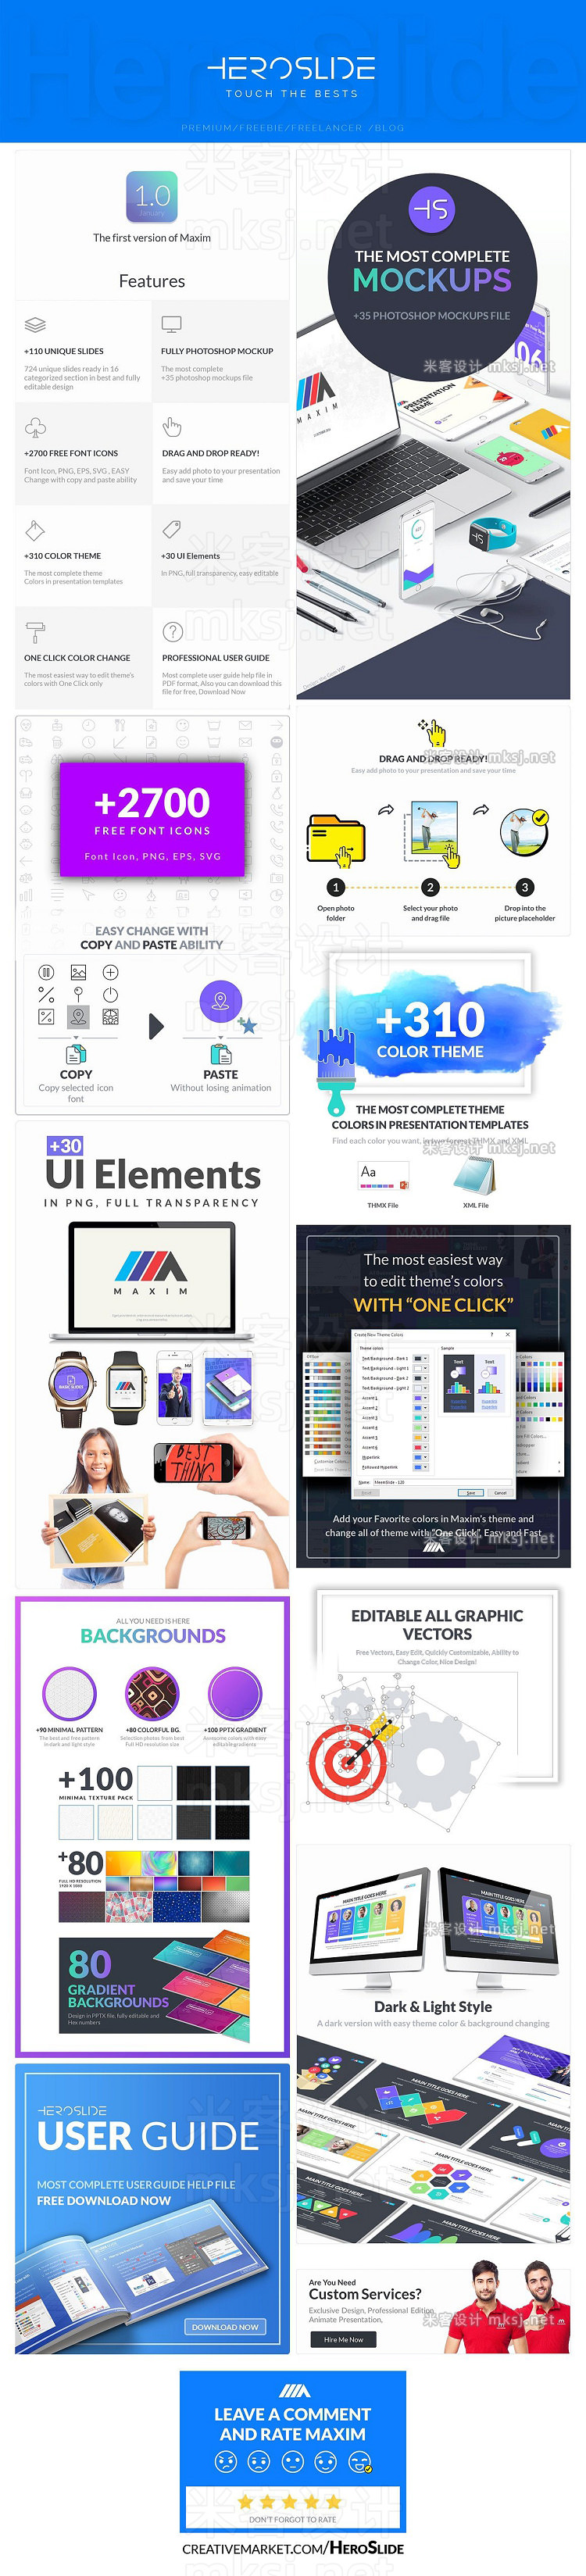 PPT模板 Marka Business Powerpoint Template